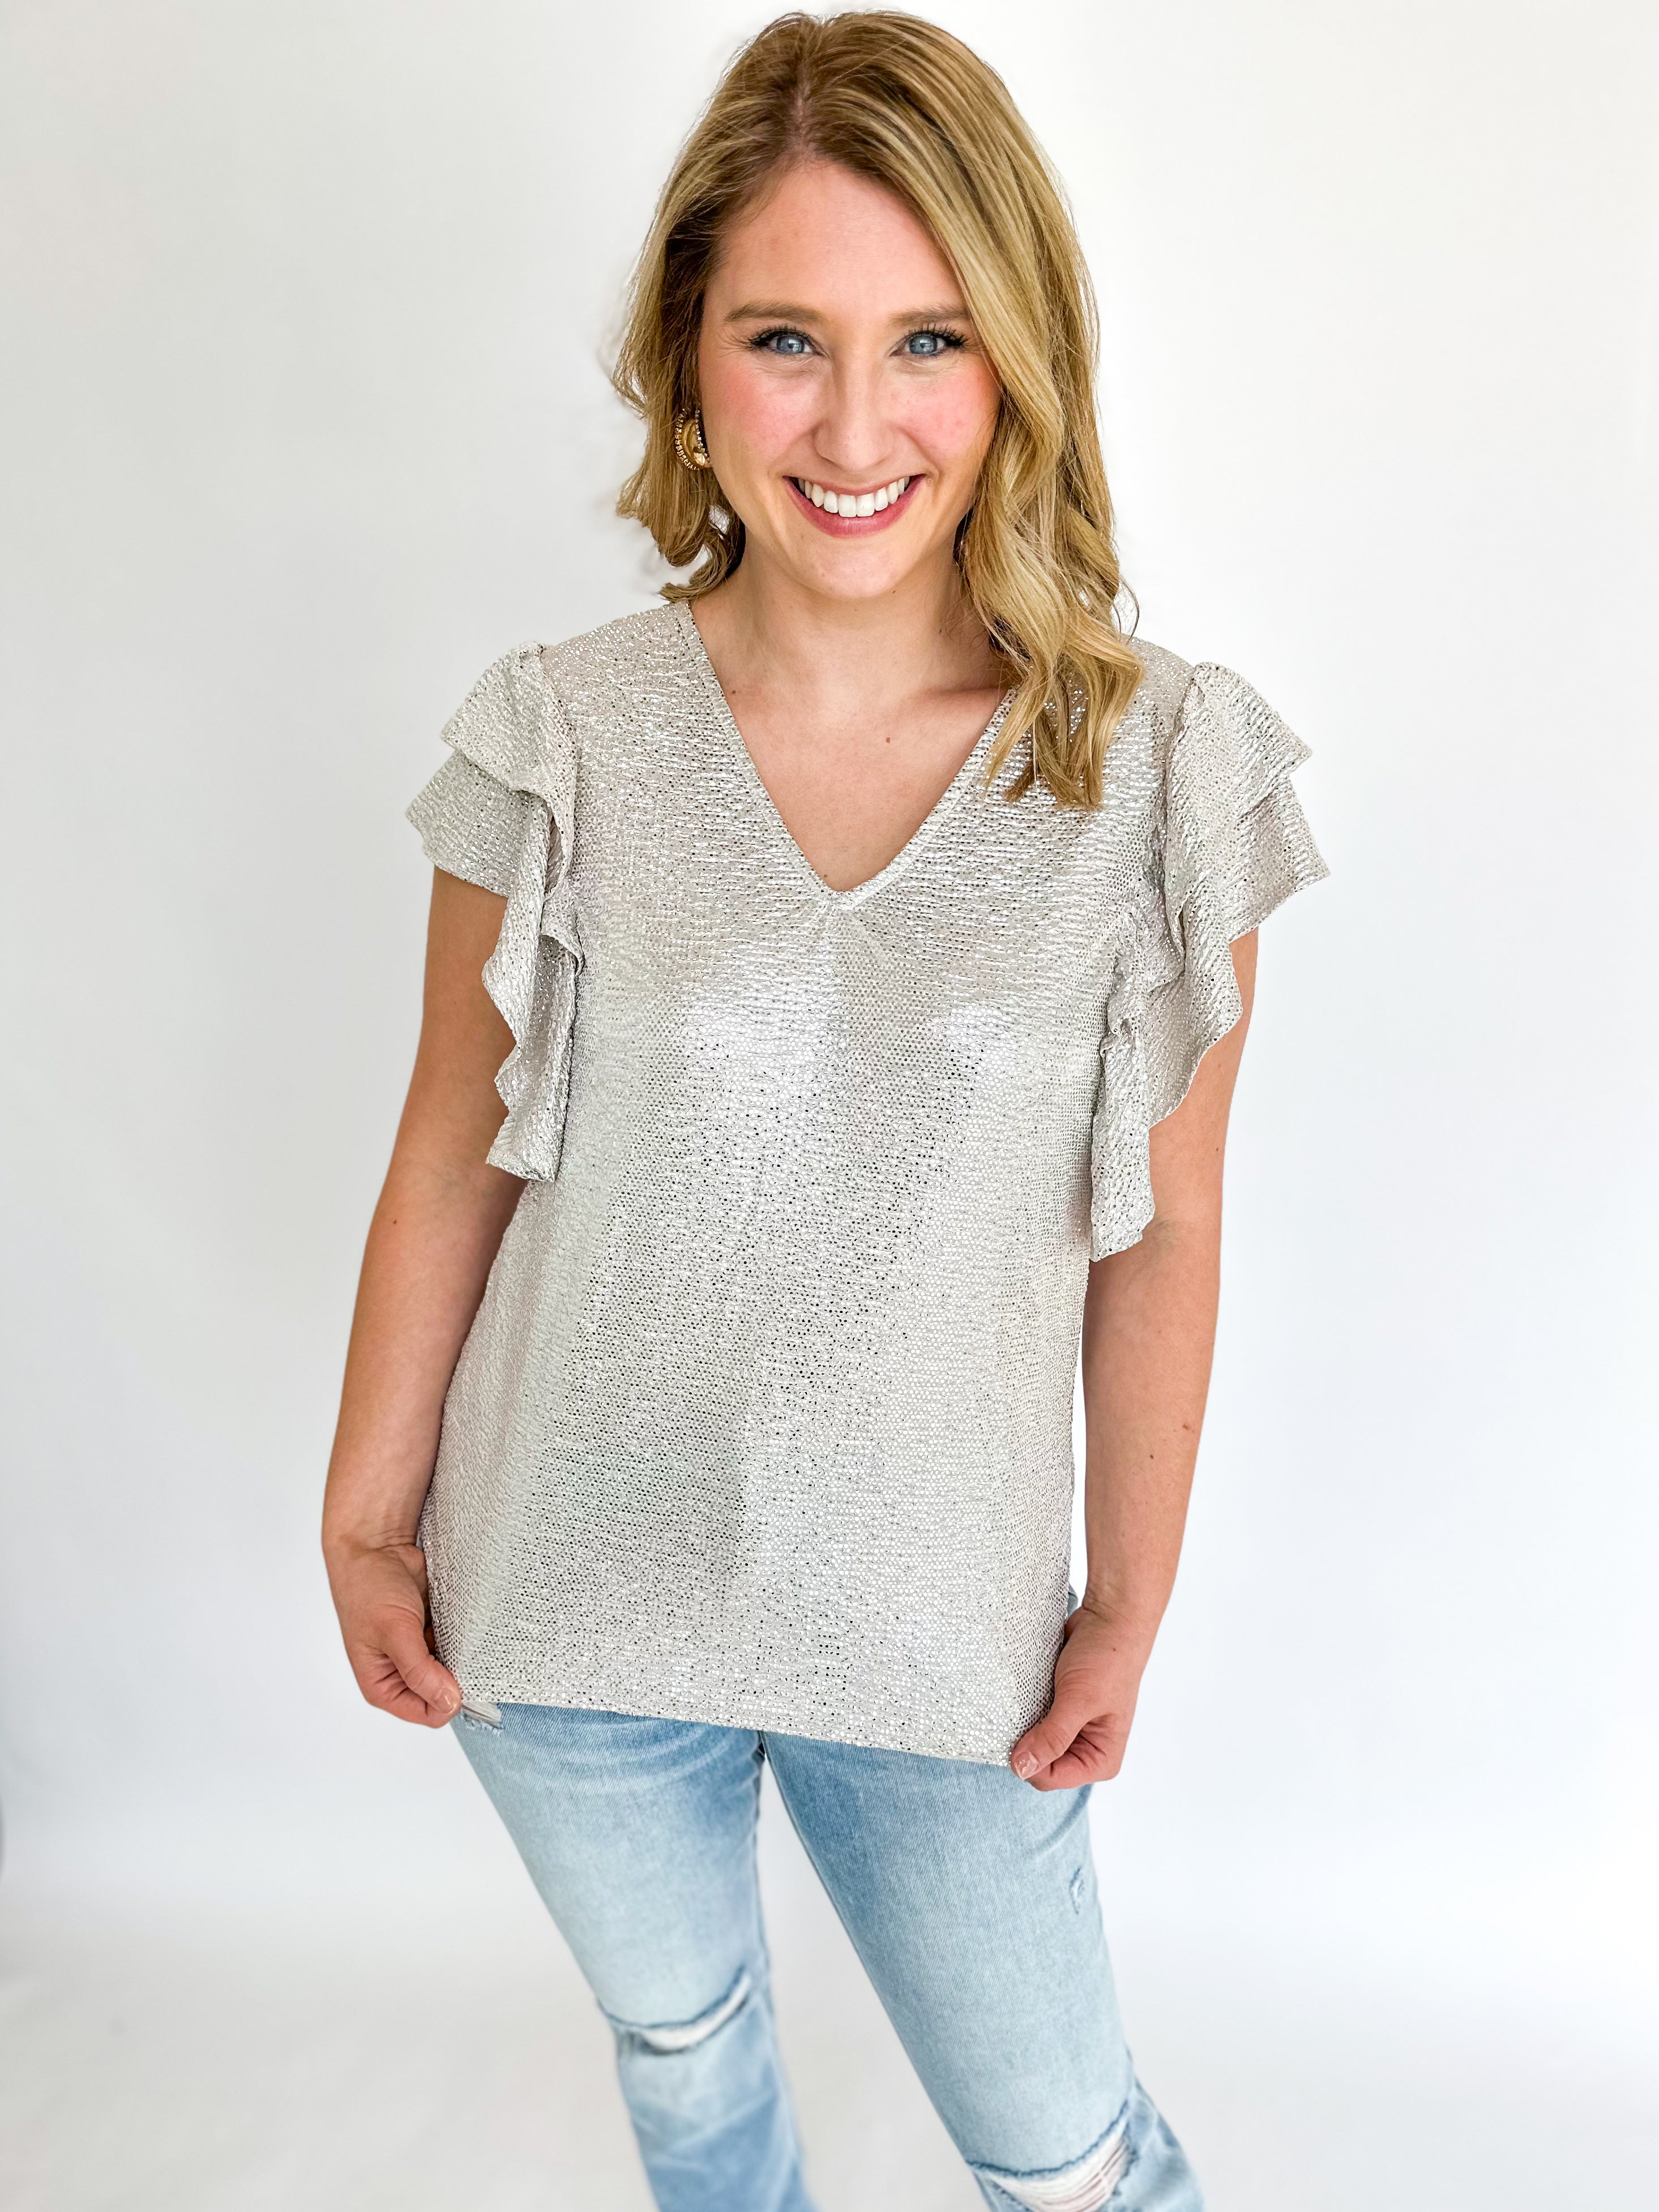 Textured Champagne Blouse-200 Fashion Blouses-CARAMELA-July & June Women's Fashion Boutique Located in San Antonio, Texas